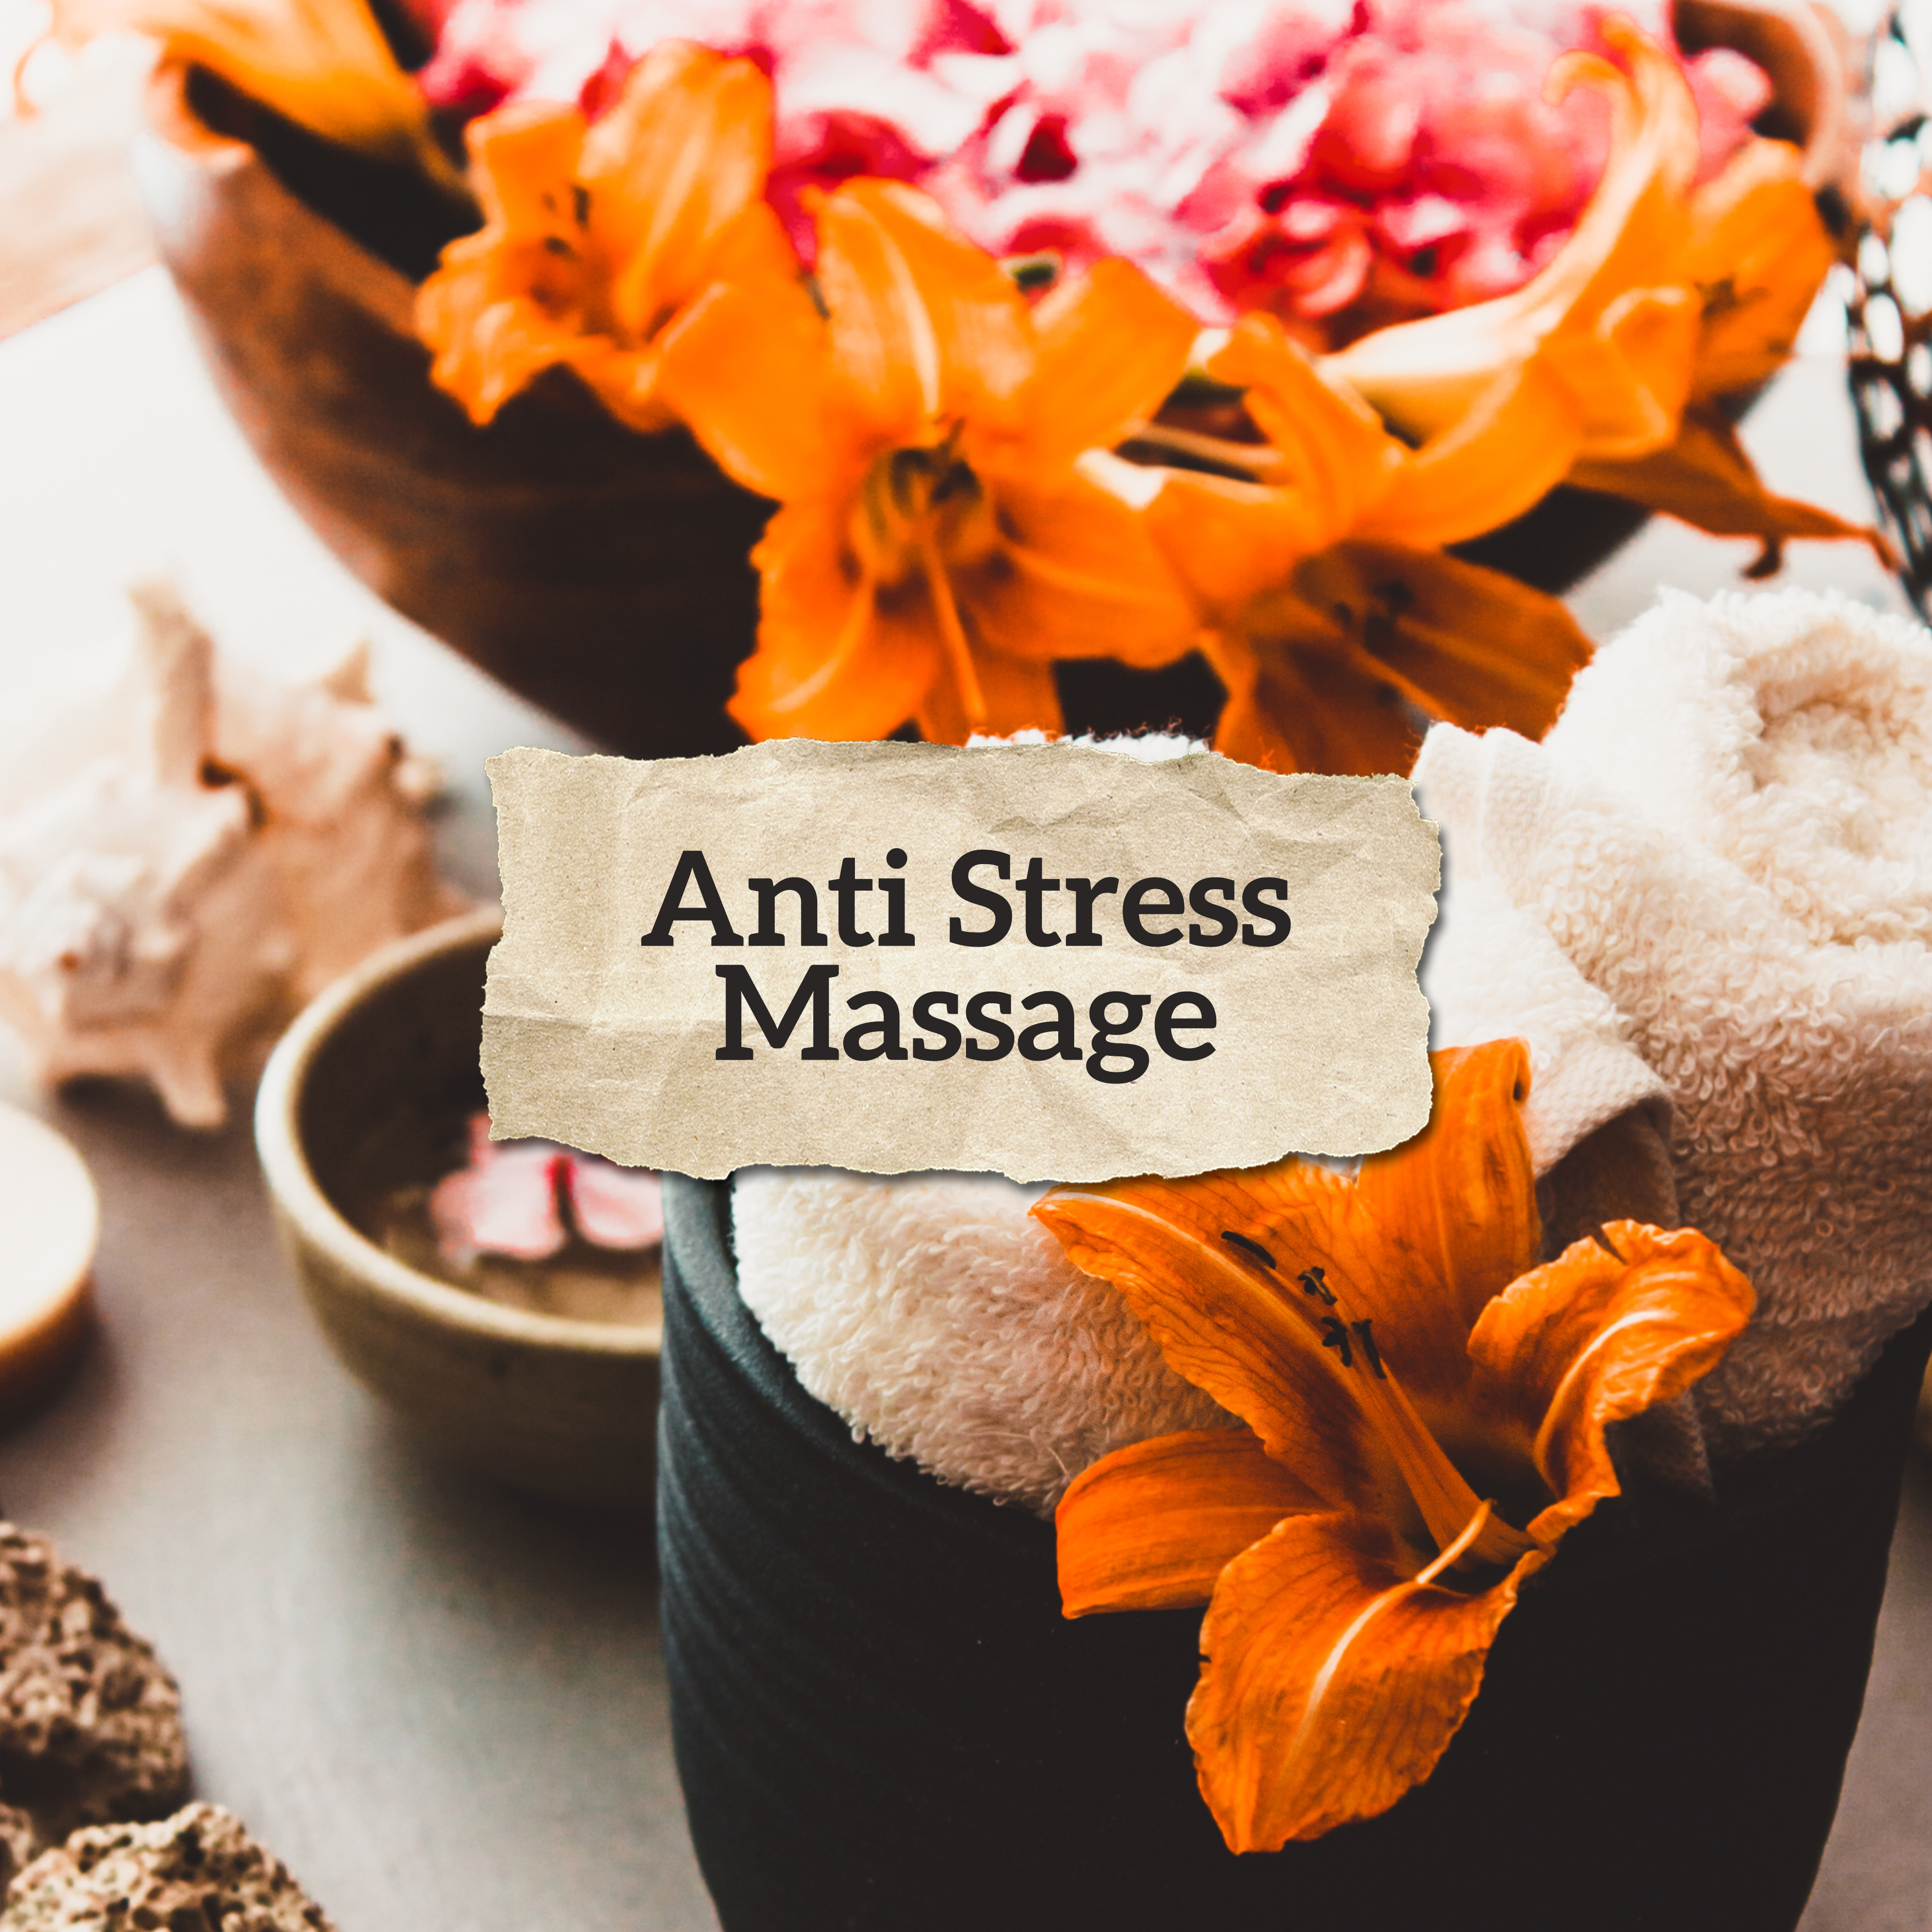 Anti Stress Massage – 15 Relaxing Songs for Spa, Sleep, Wellness, Deep Relaxation, Zen Spa, Relax Zone, Harmony for Body, Relaxing Spa Music